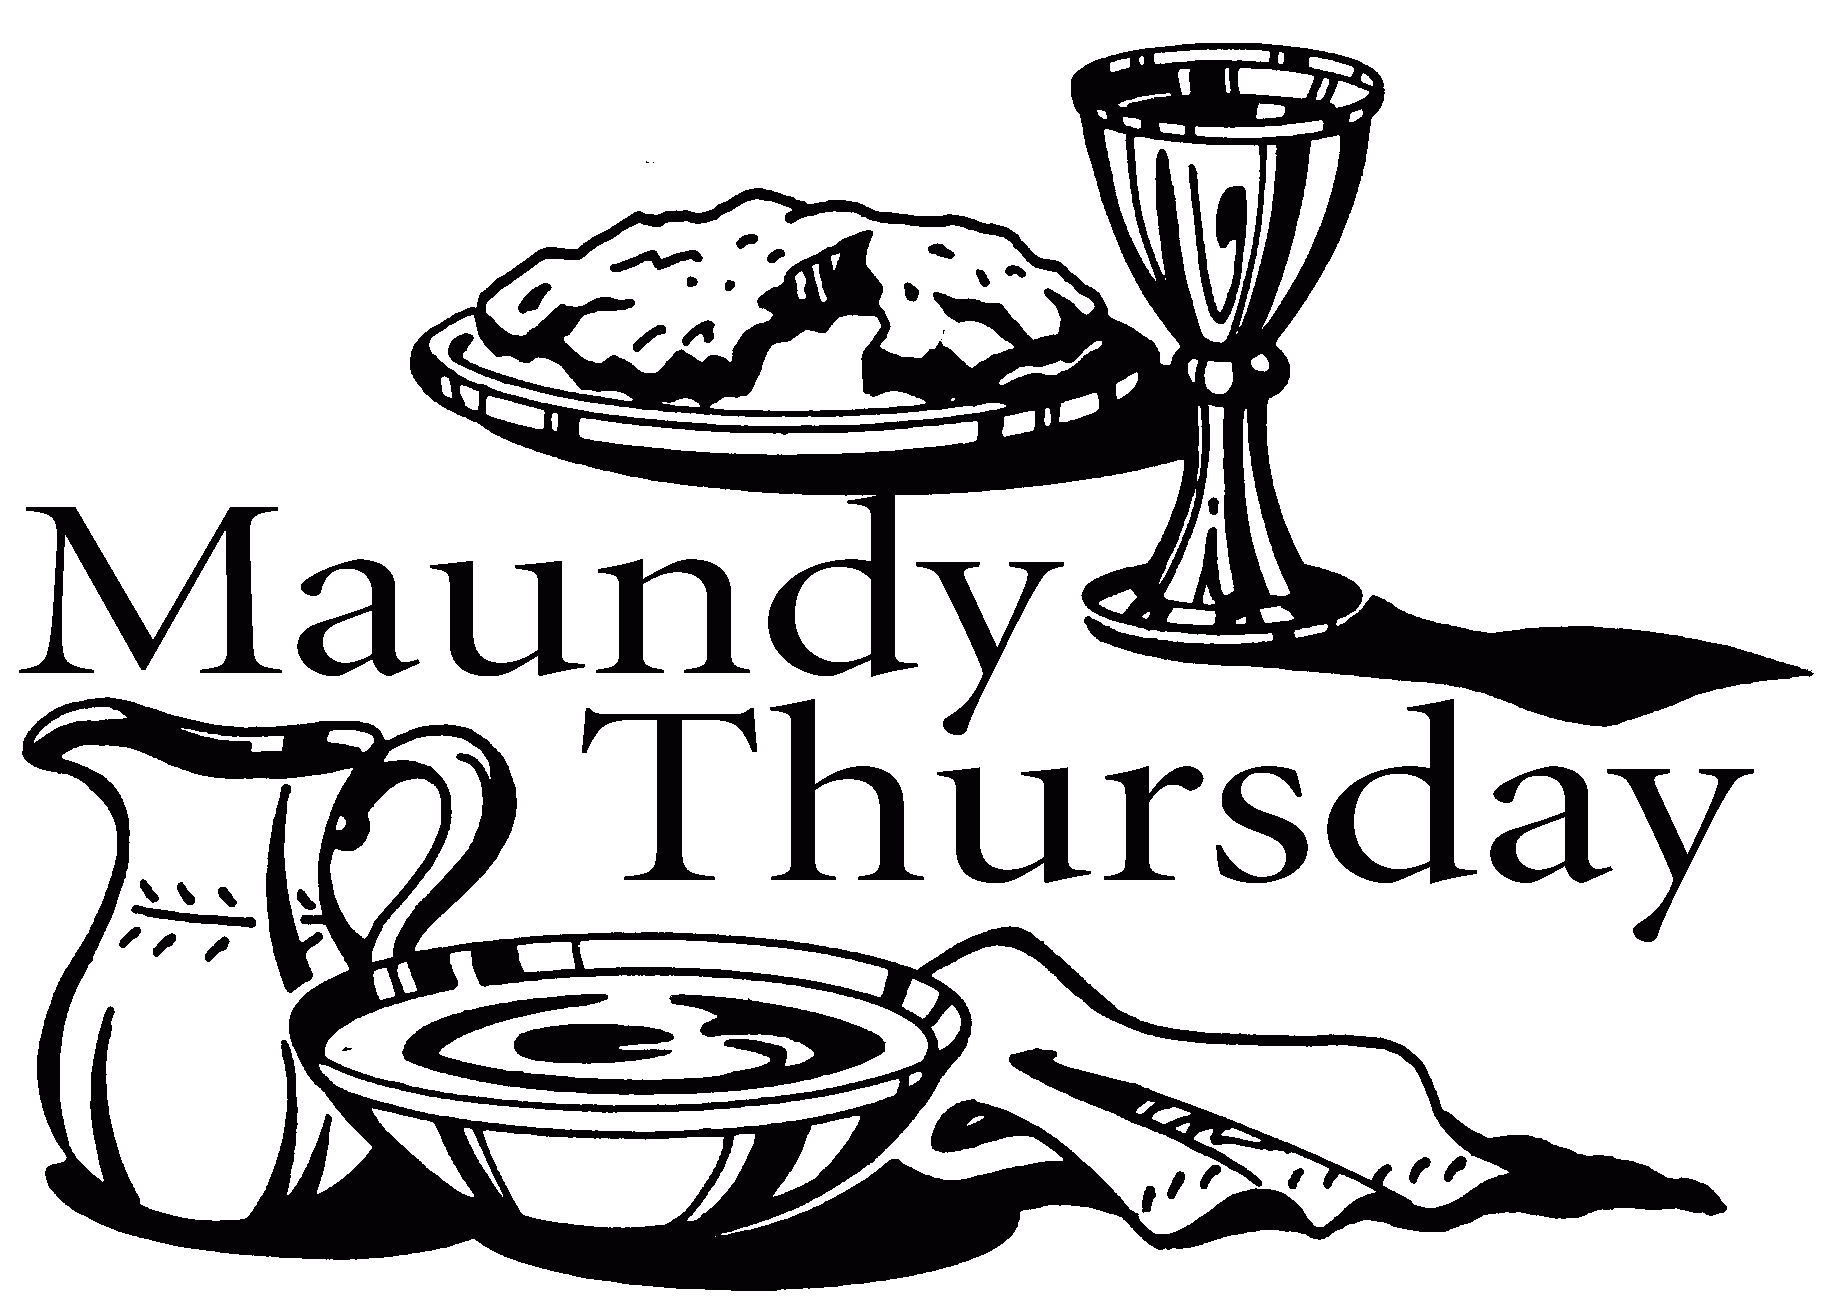 Maundy Thursday Is The Thursday Before Easter Christians Remember It